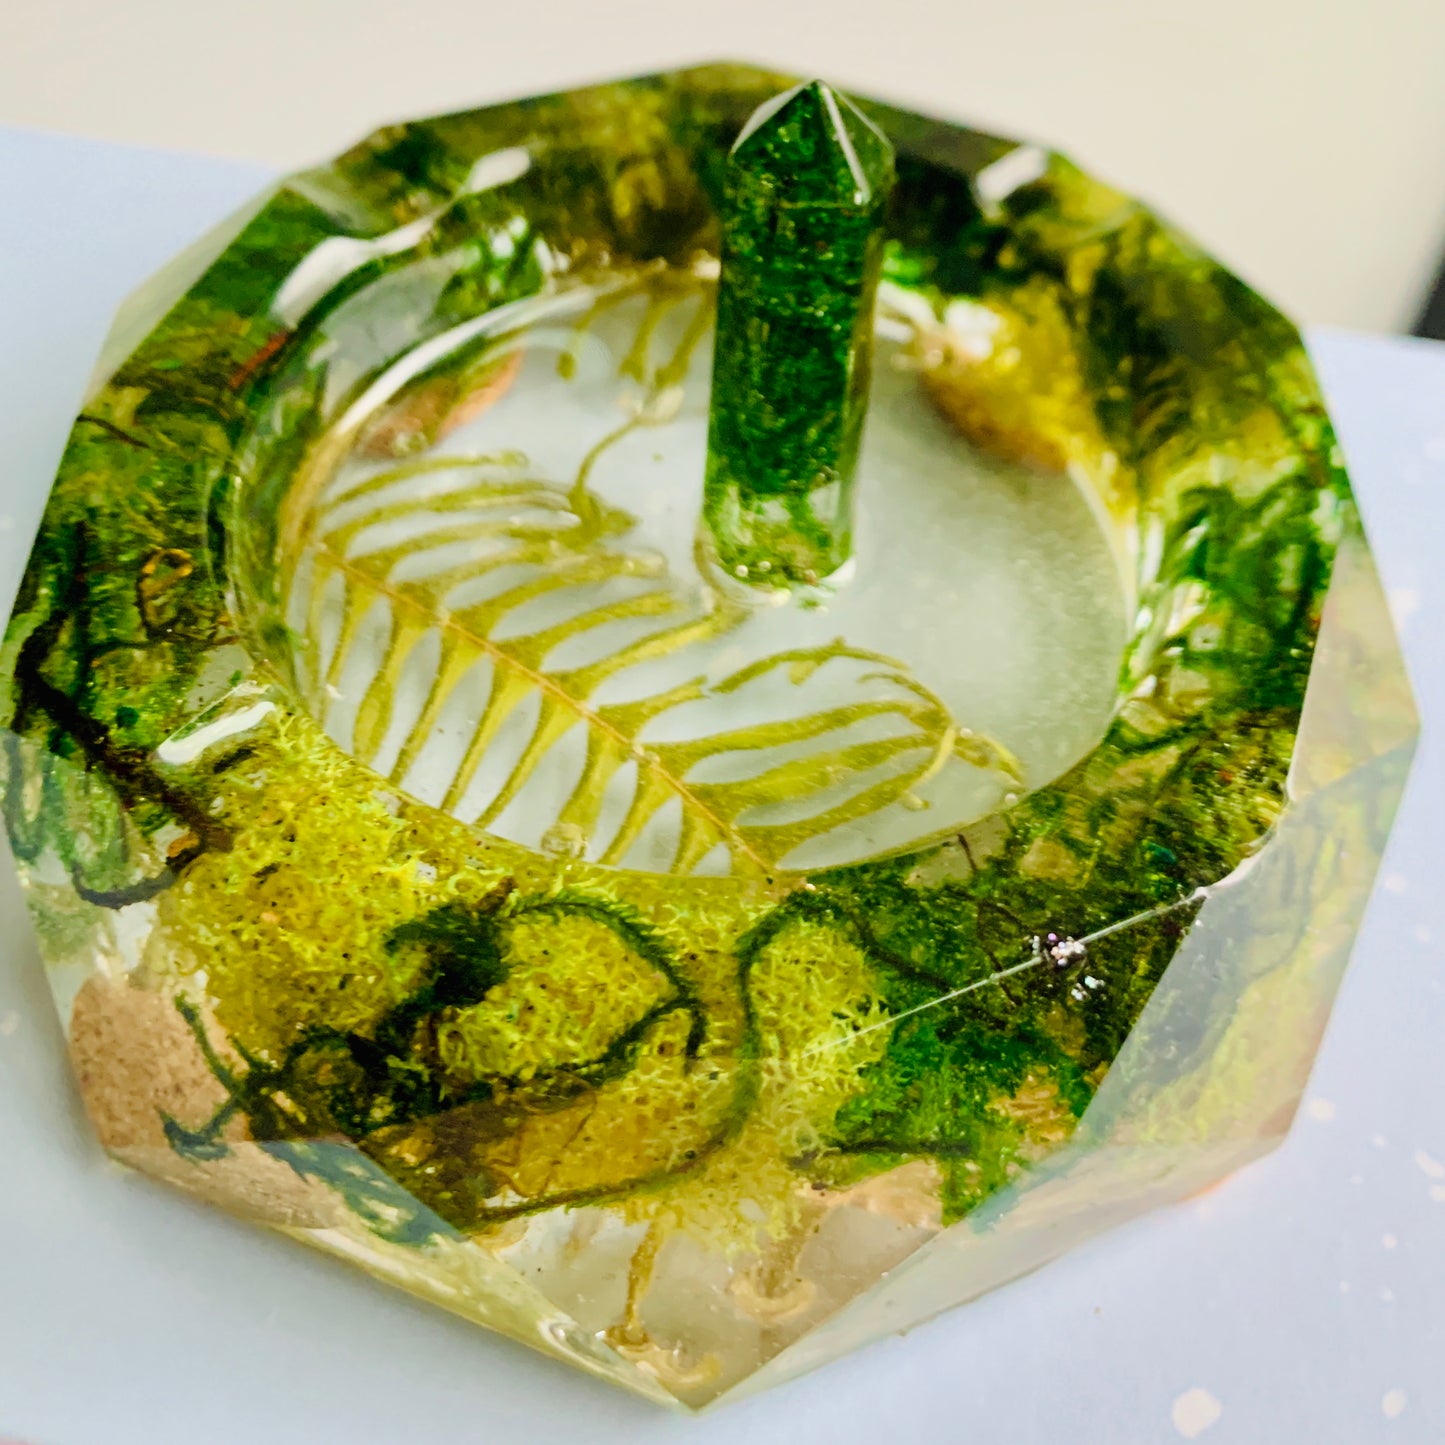 LivTray with Crystal Ring Holder - Mossy Dreams